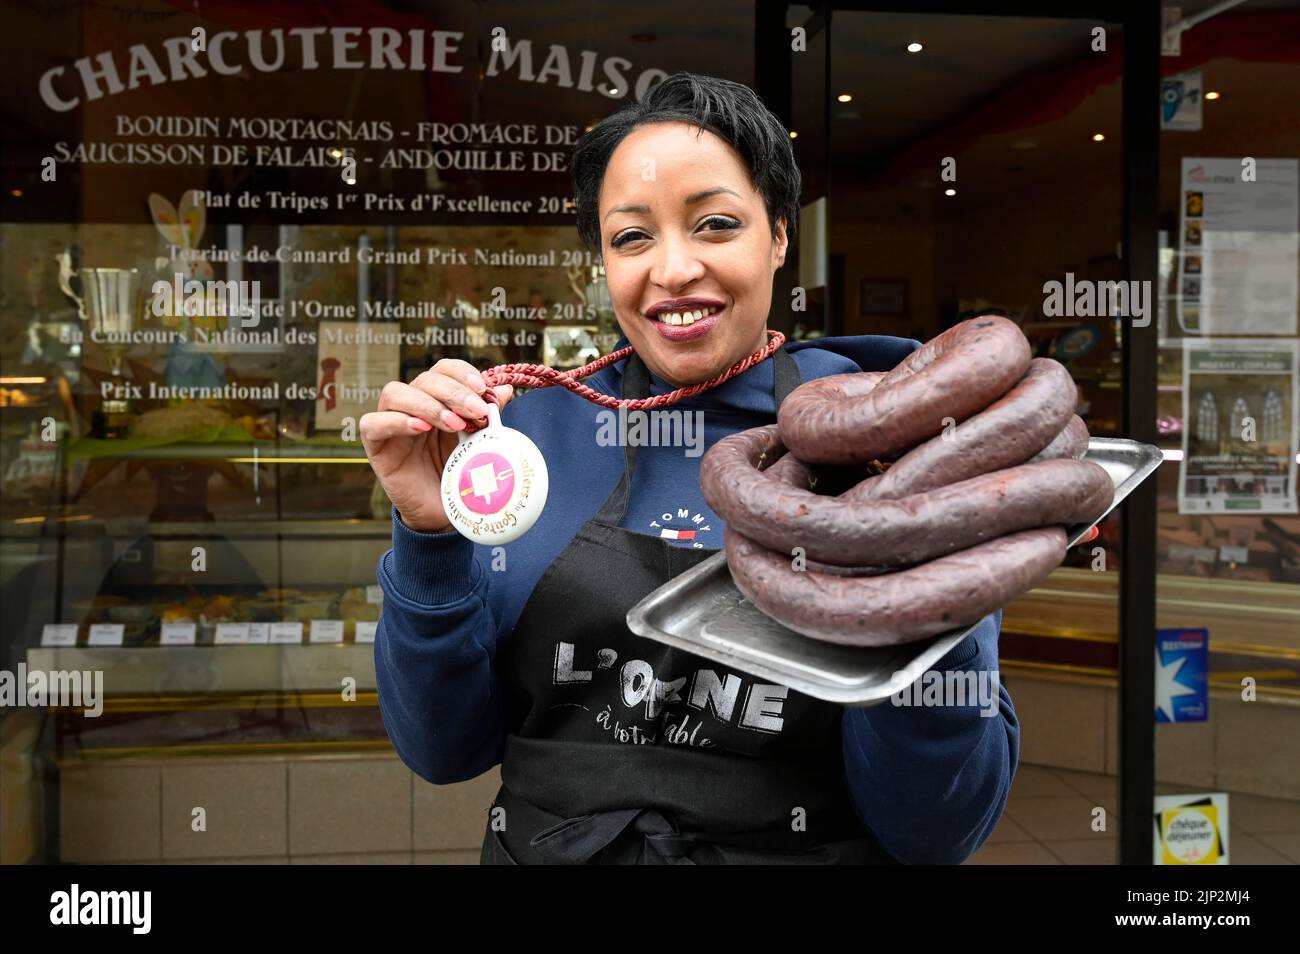 Elisabeth Harbert, co-owner of 'Le Roi du Boudin' in Mortagne-au-Perch, with her famouse blood sausage Stock Photo